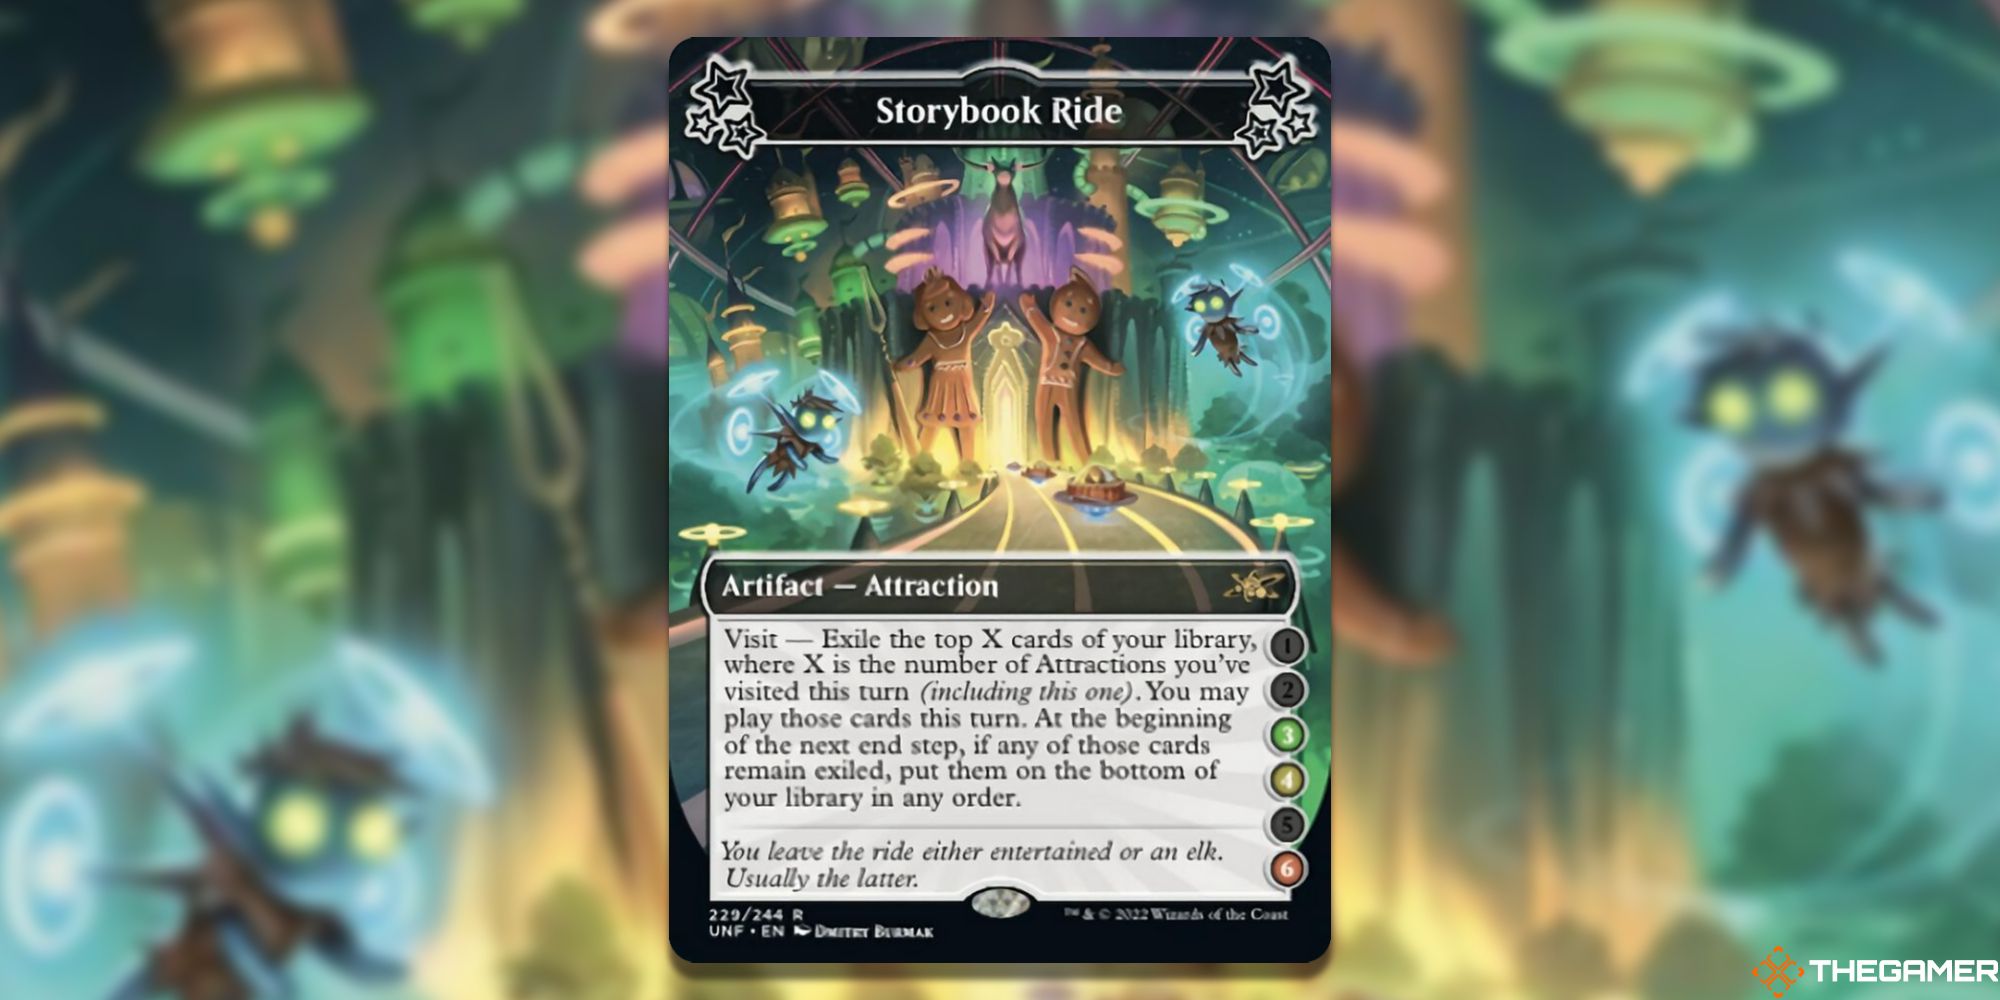 The card Storybook Ride from Magic: the Gathering.